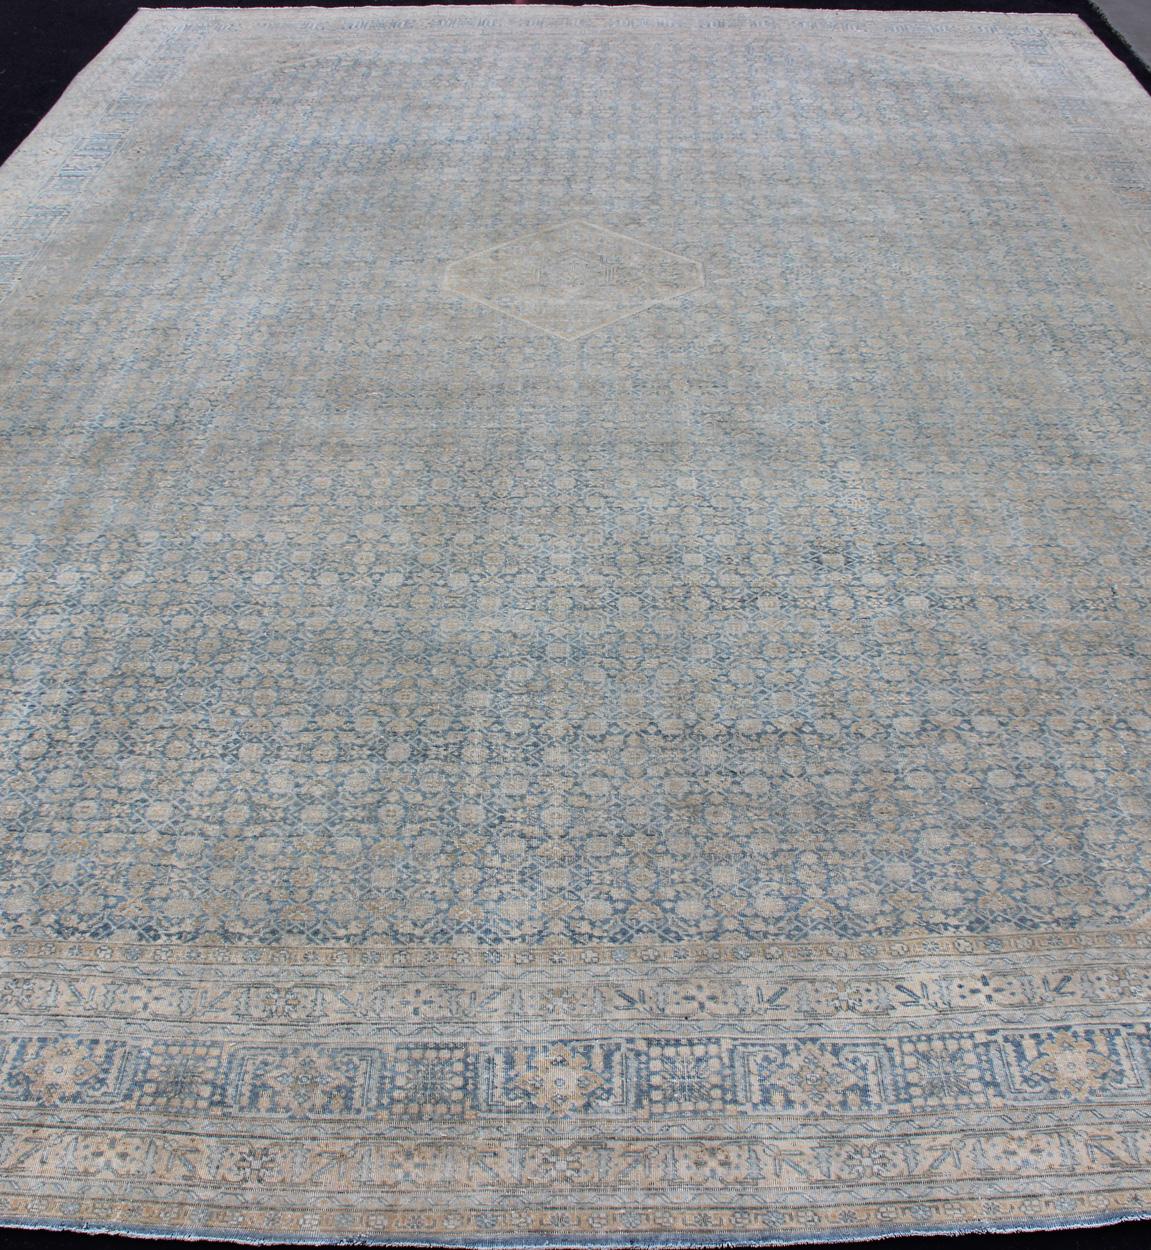 Antique Persian Large Tabriz Rug In All-Over Herati Design in Shades of Blue and Tan. Keivan Woven Arts/ rug 18-0701, country of origin / type: Iran/ Tabriz, circa 1920.

Measures: 13' x 18' 9